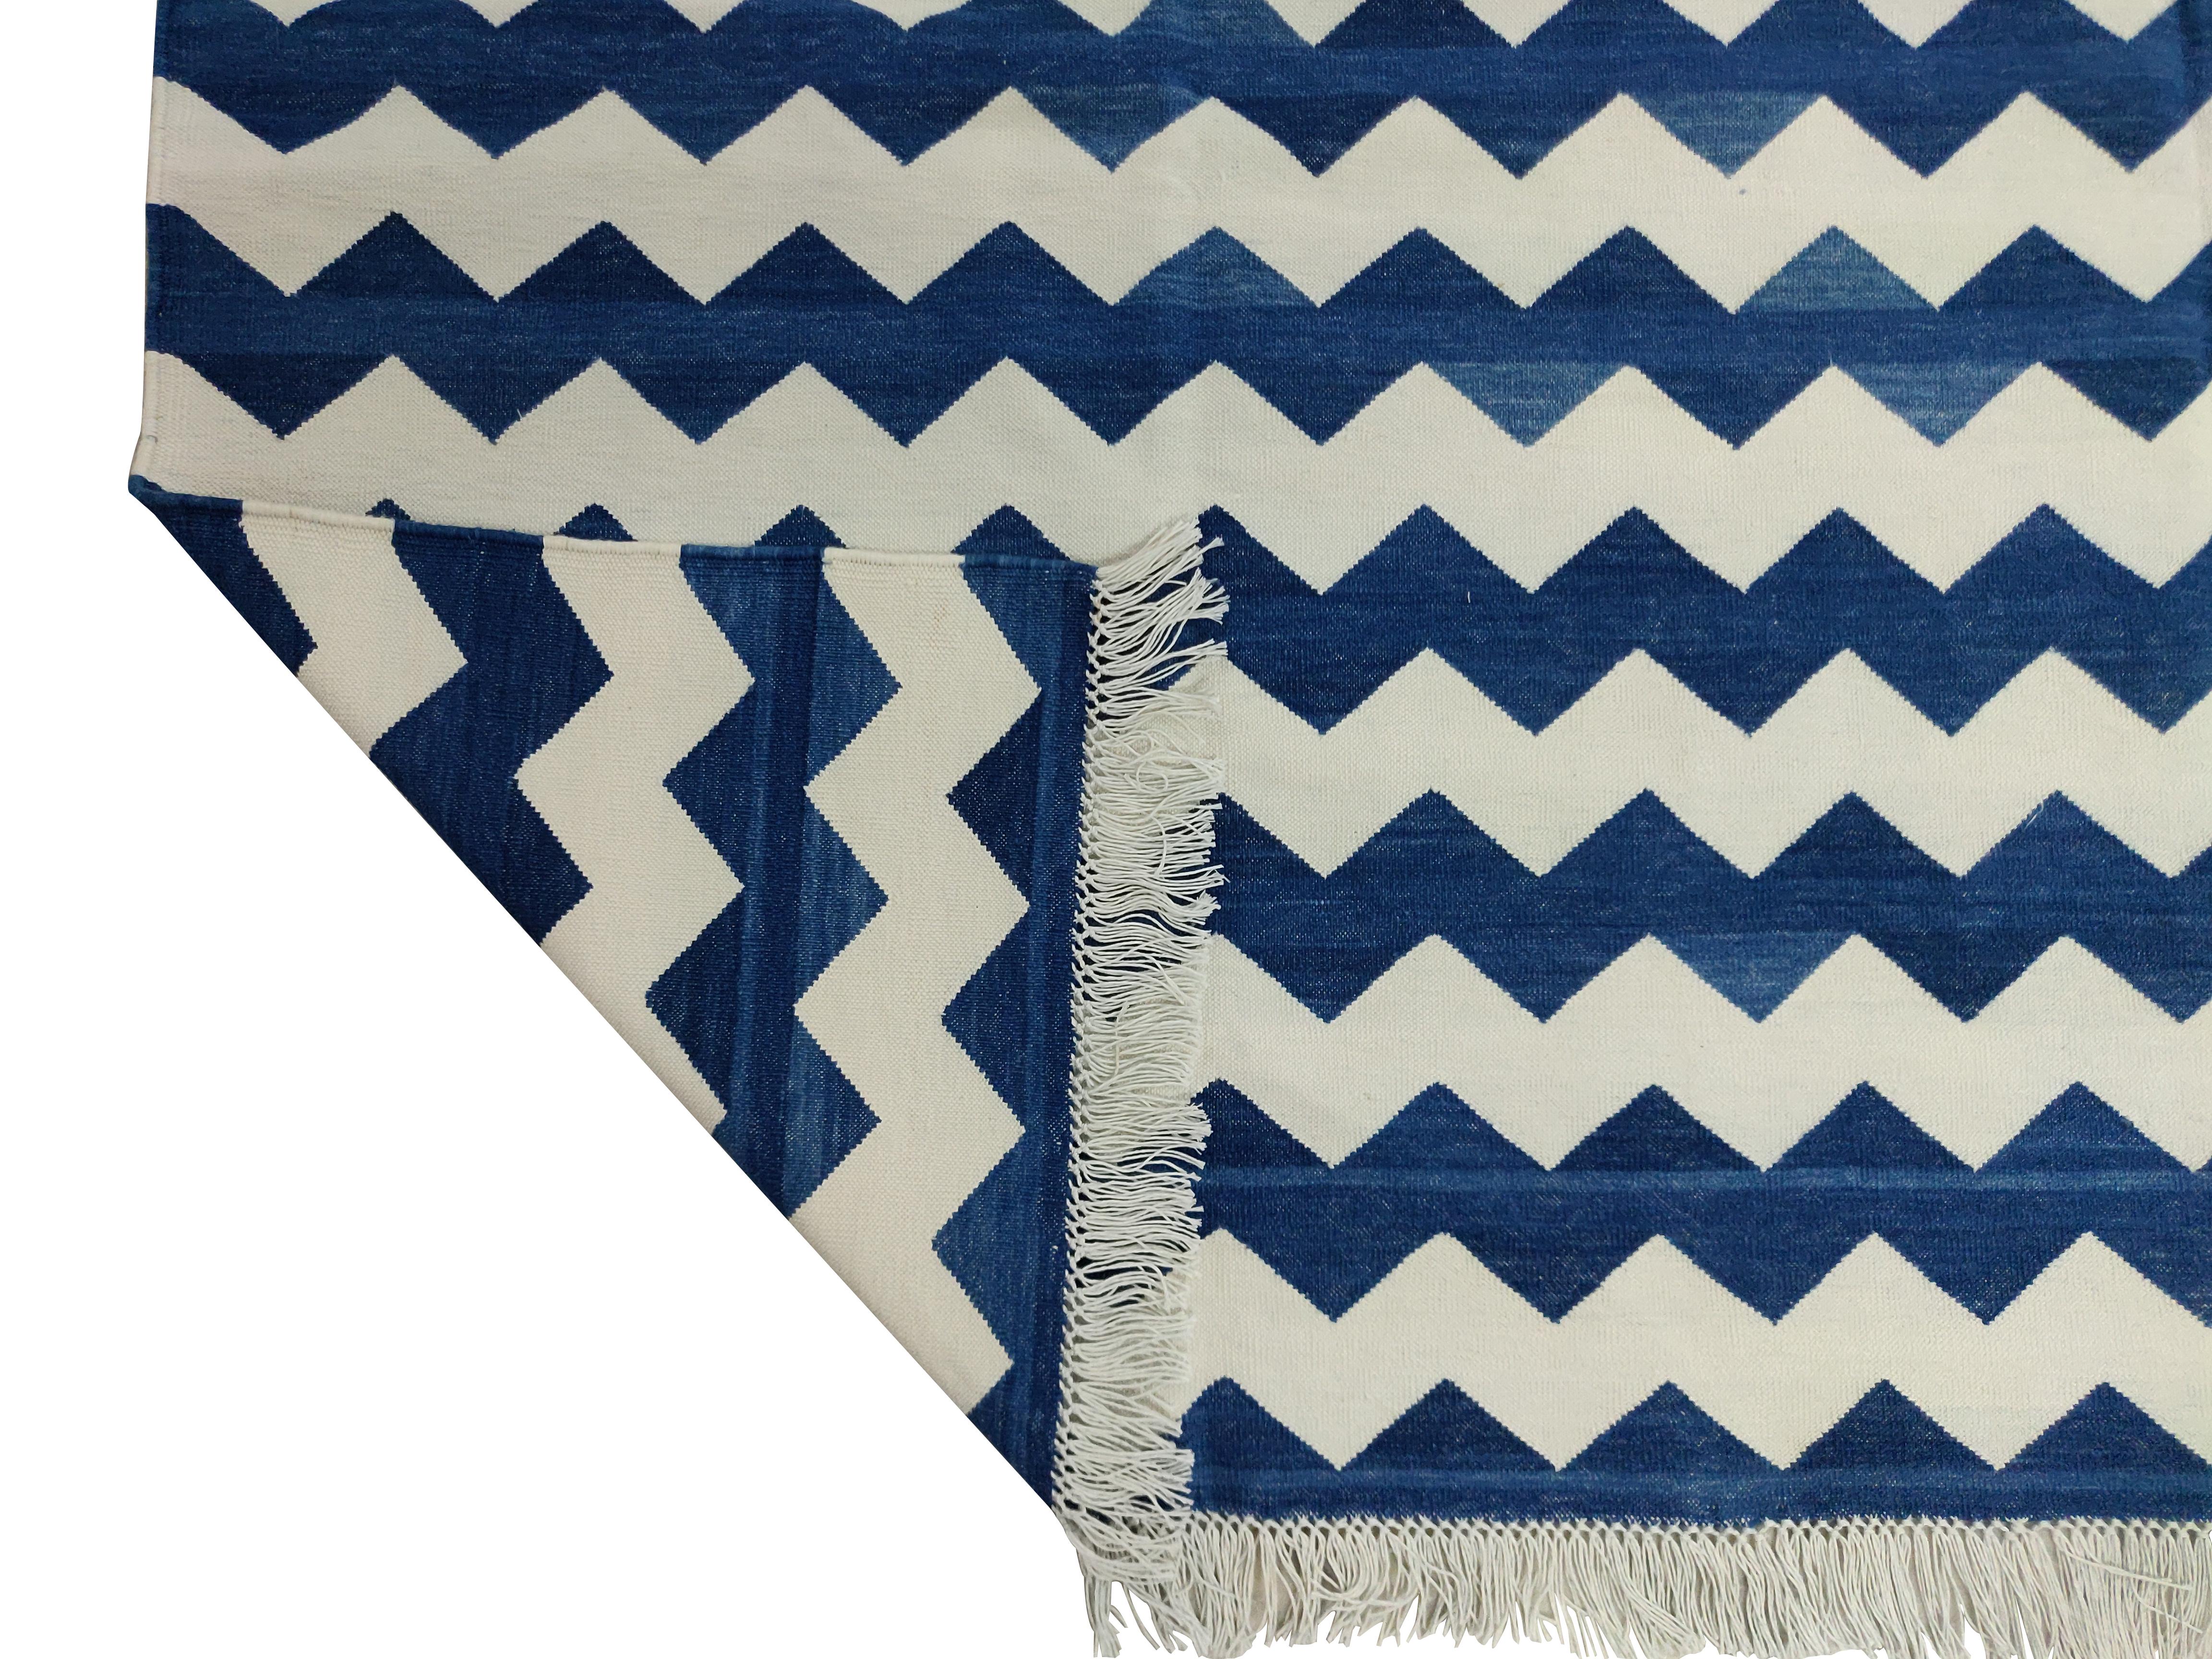 Handmade Cotton Area Flat Weave Rug, 6x9 Blue And White Zig Zag Striped Dhurrie In New Condition For Sale In Jaipur, IN